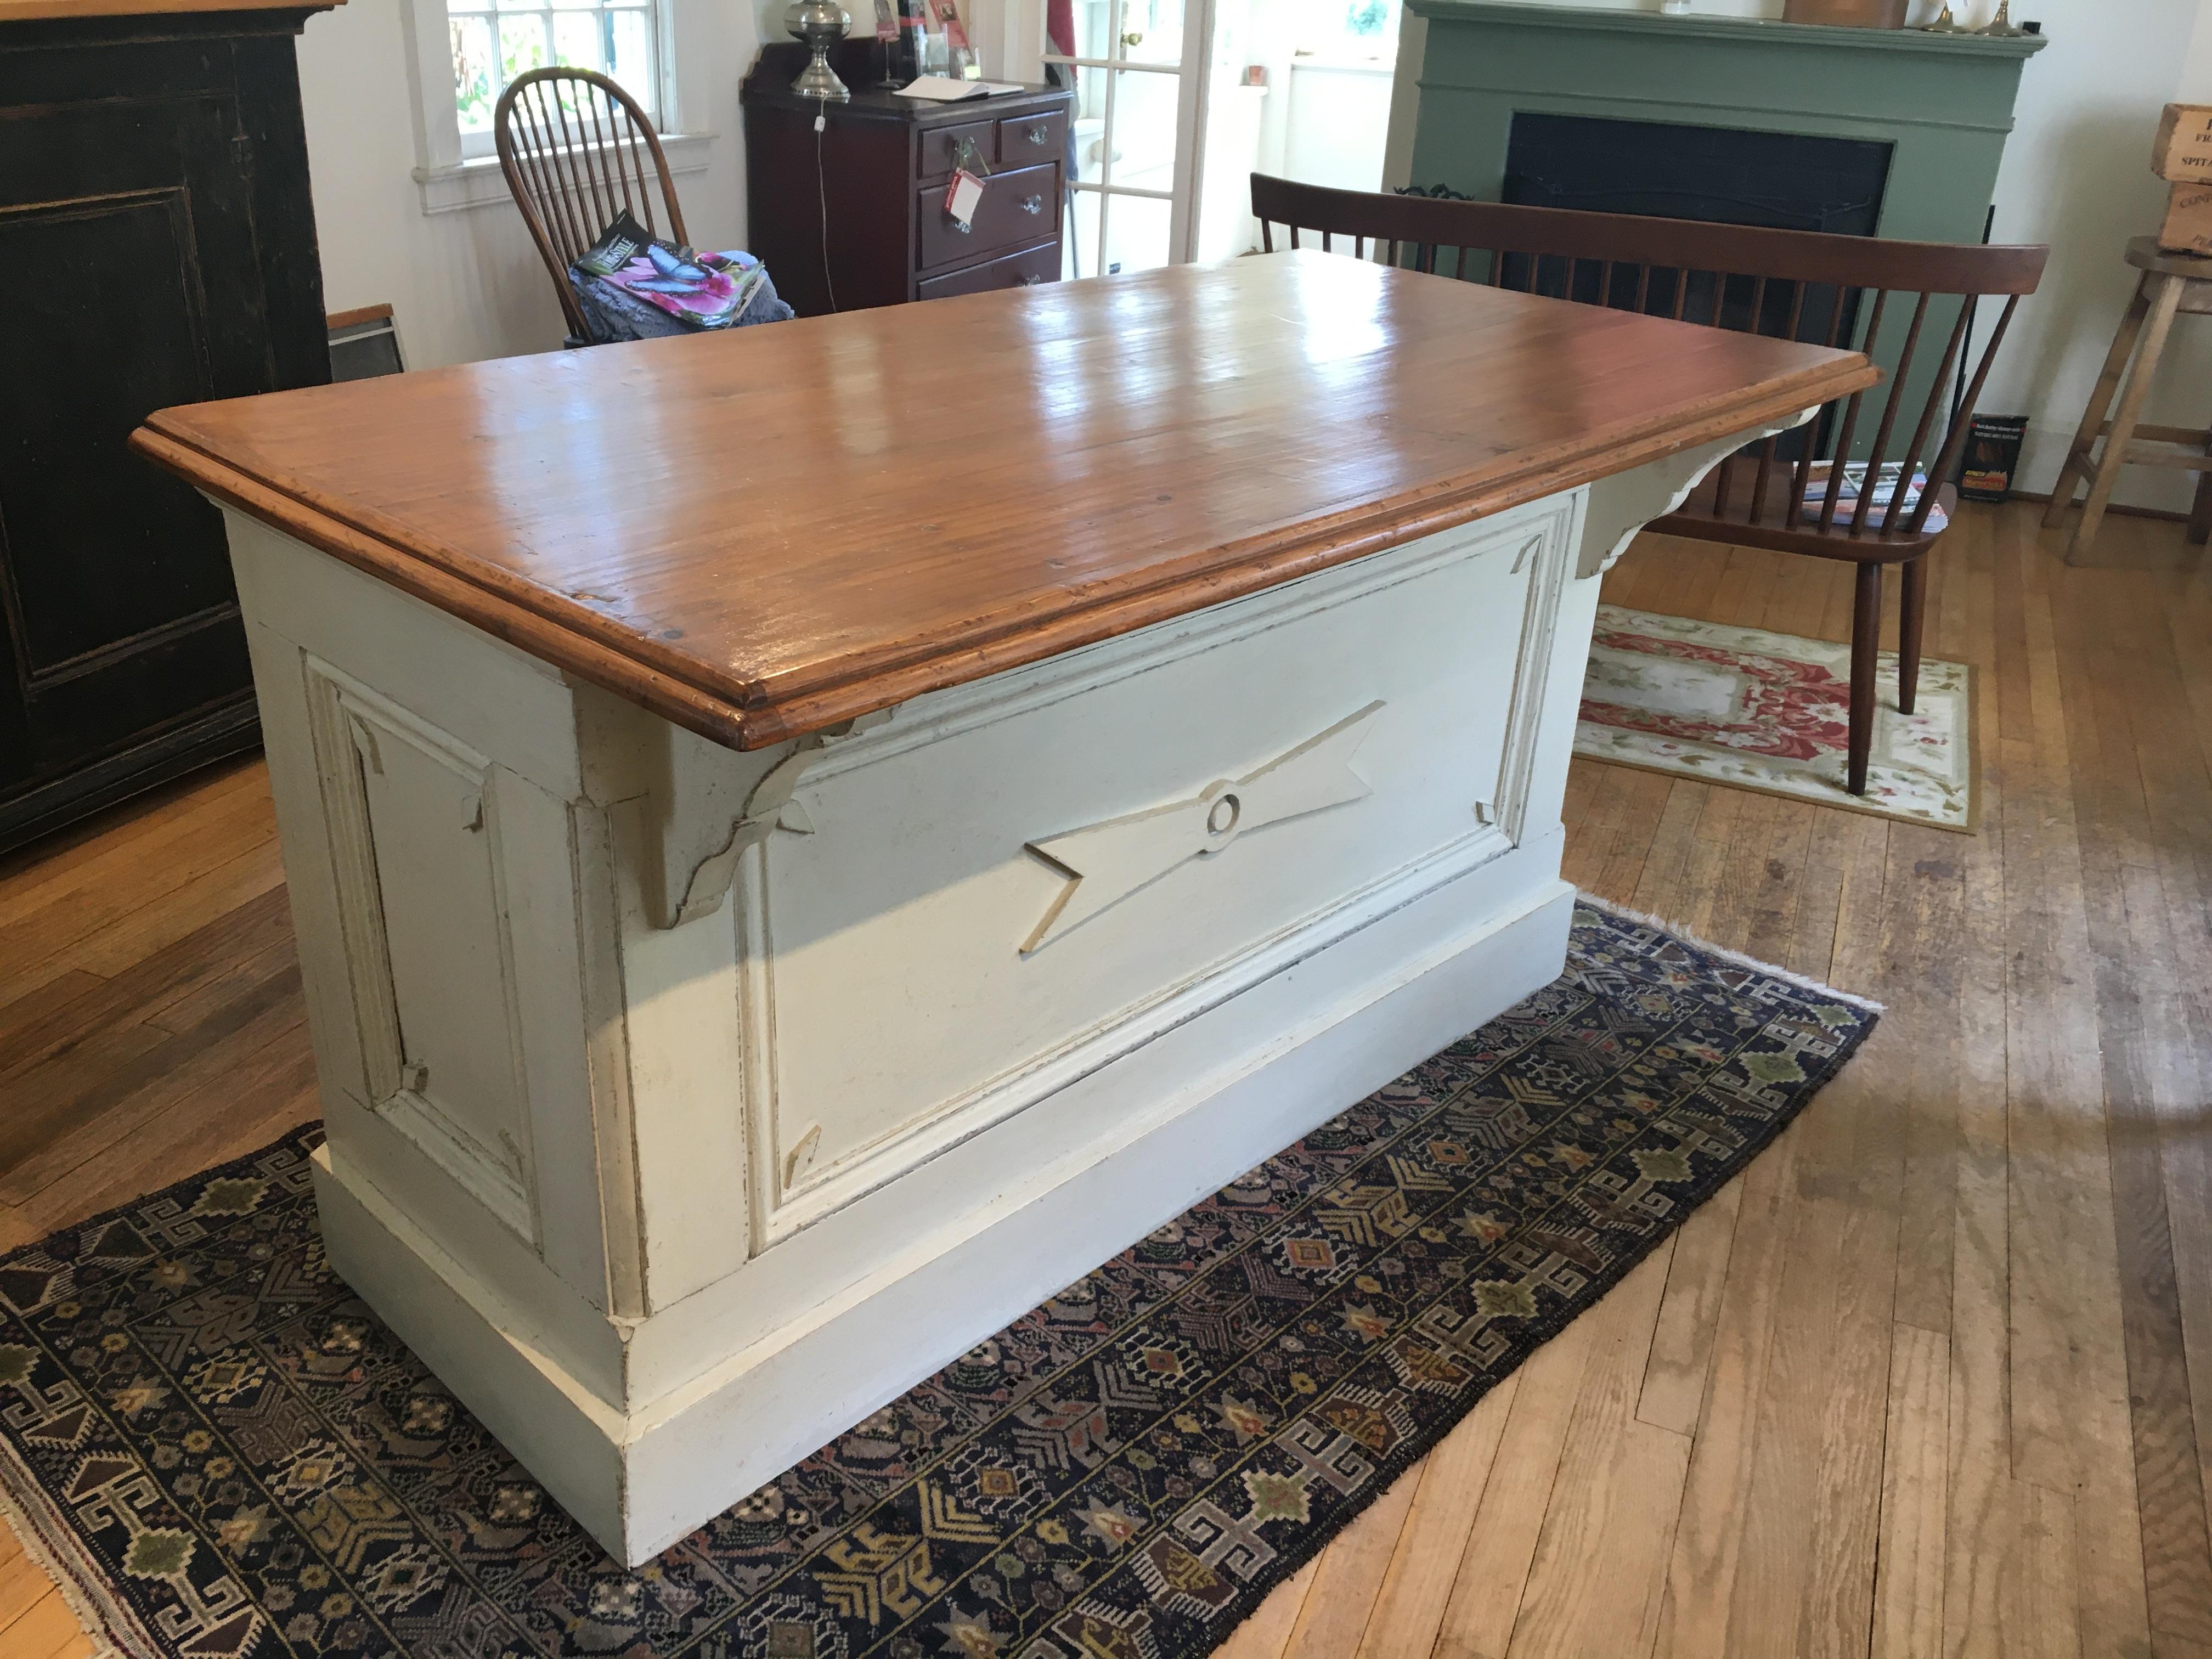 Circa reproduction - This Canadian antique dealer makes us store counters from 100% old parts and with the support of a well known architect in Quebec. the drawers are from a sideboard, the doors from a buffet and the top from a table. simply a